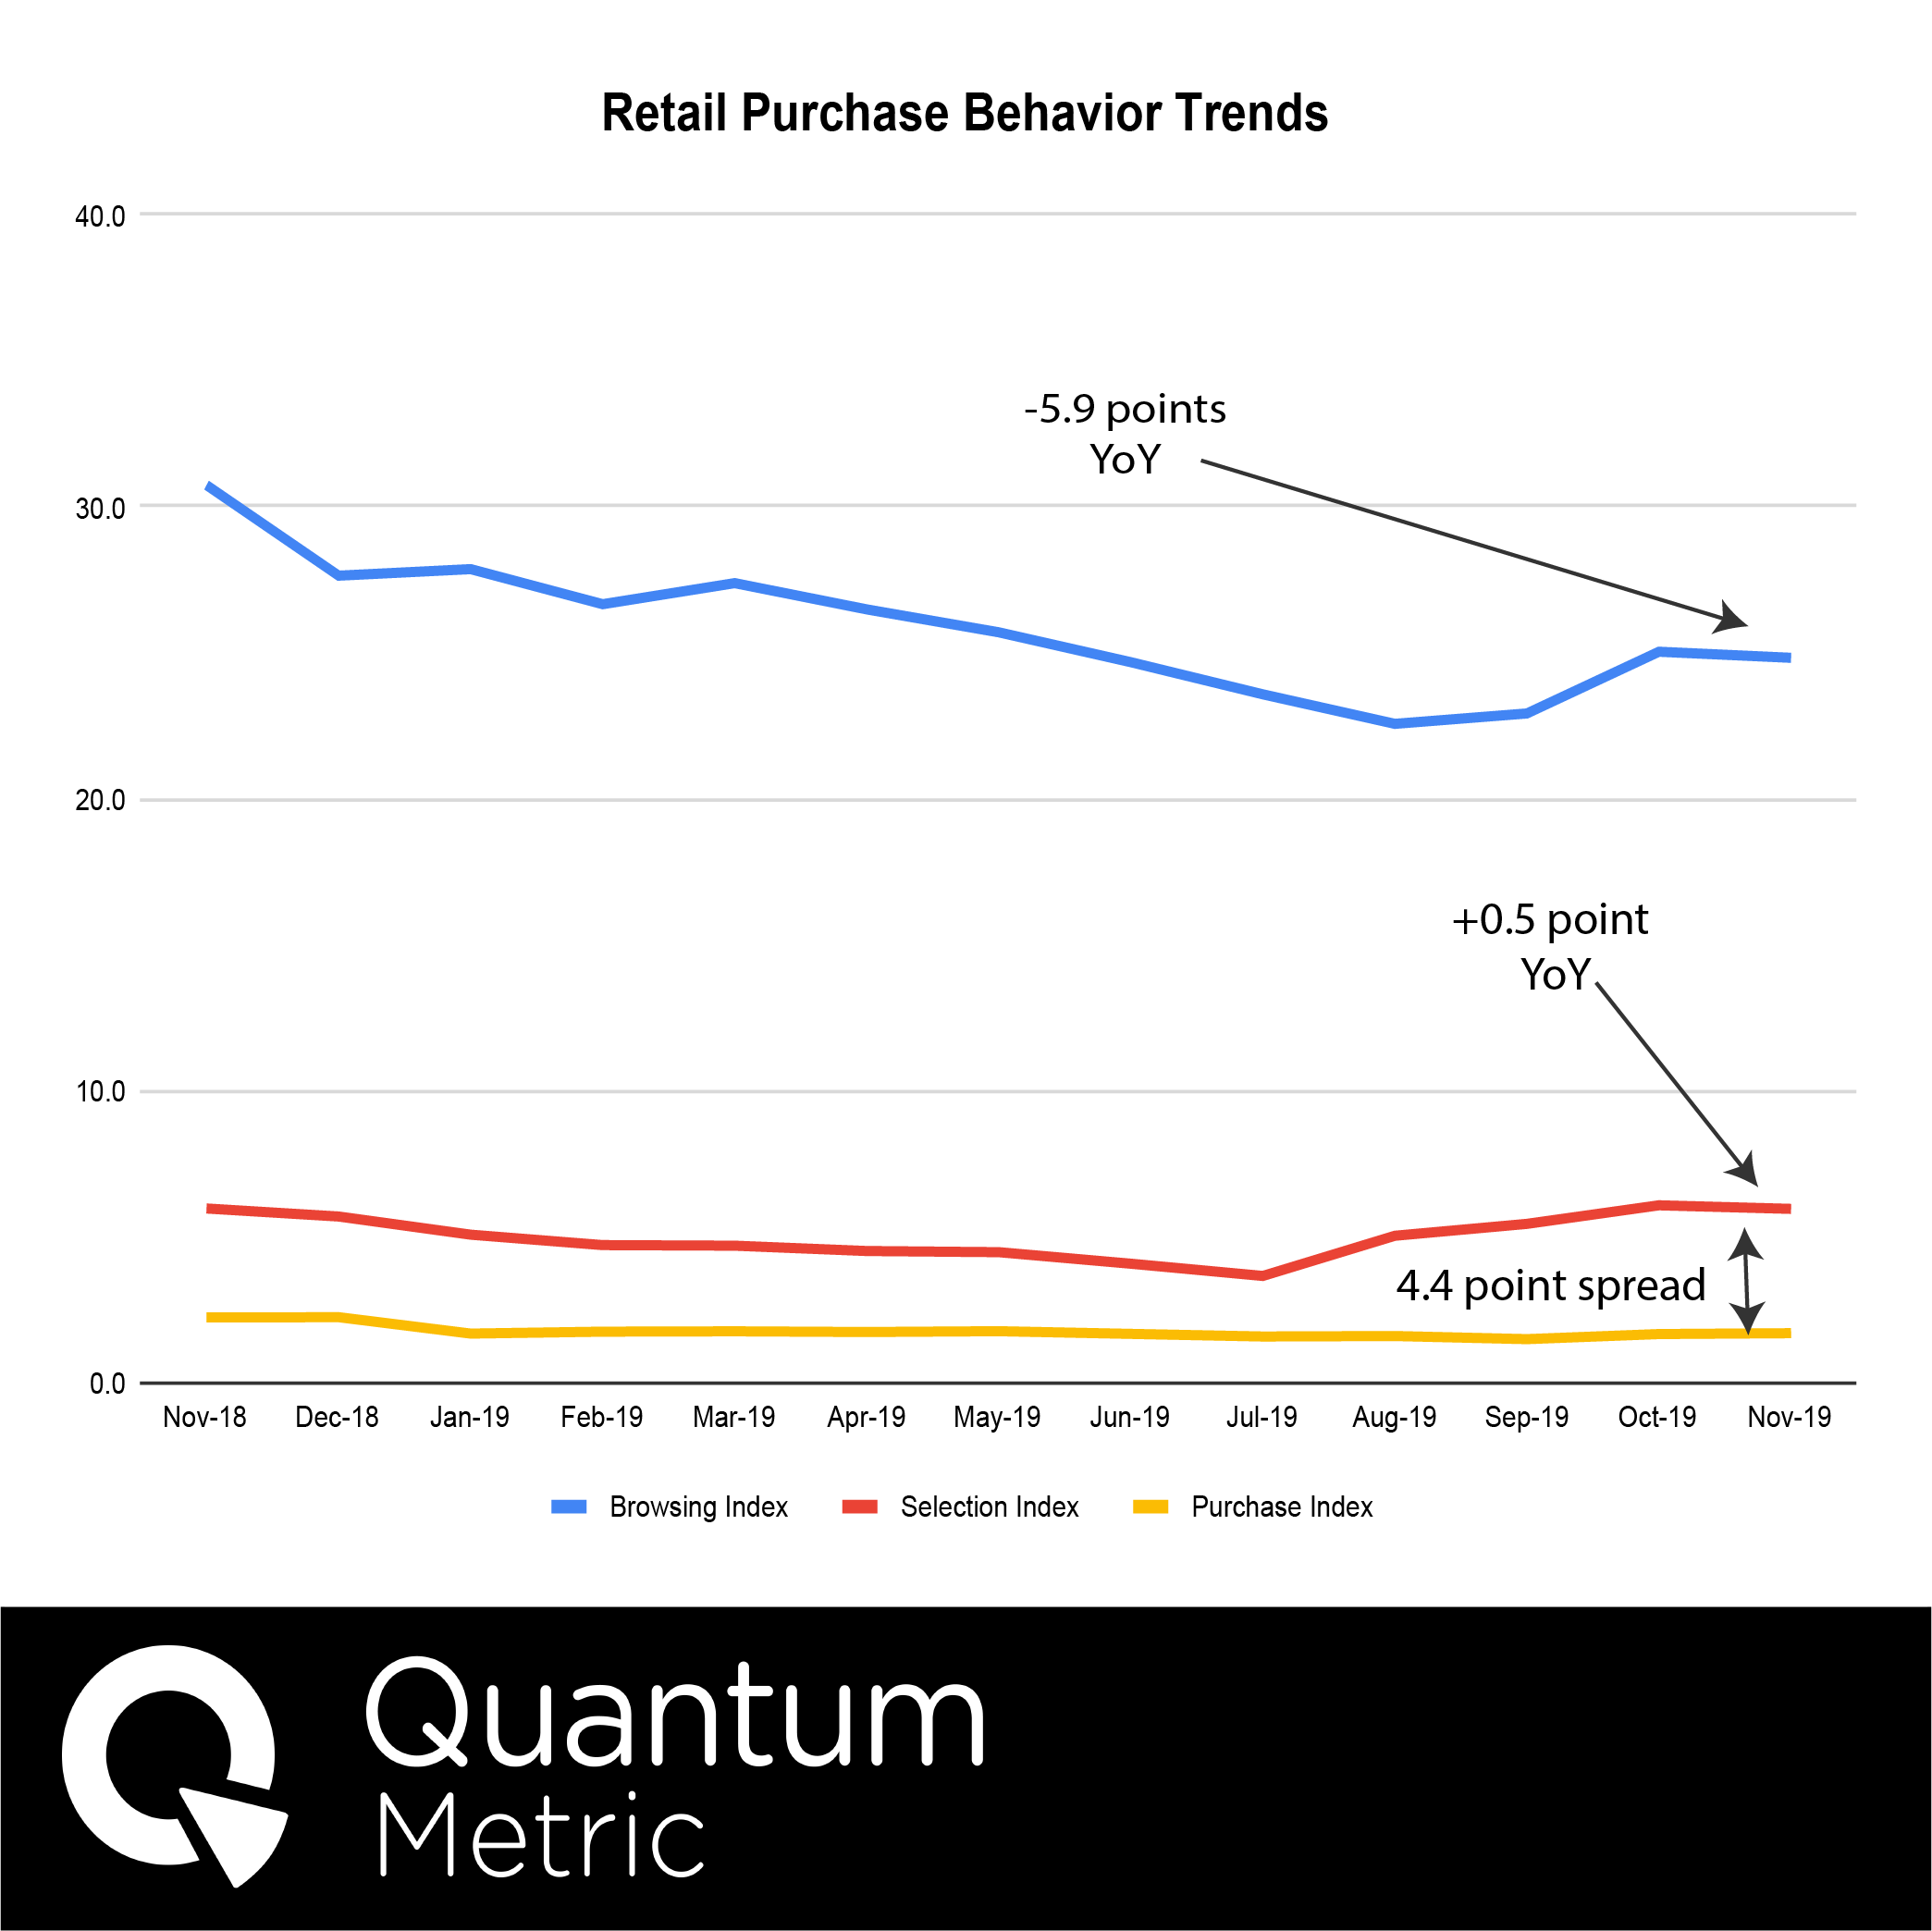 Retail Purchase Trends